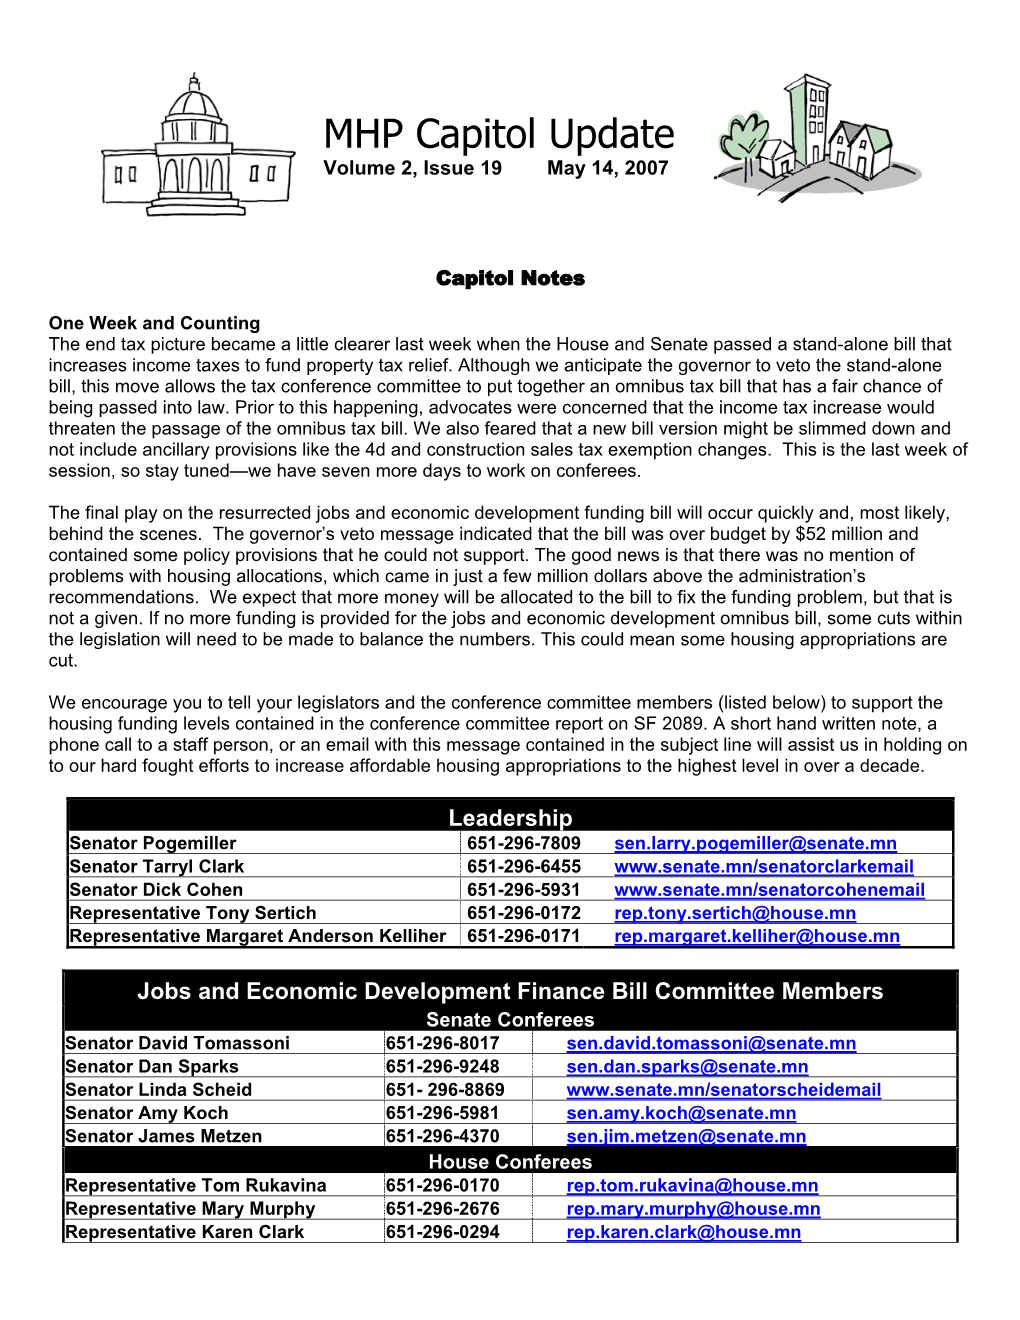 MHP Capitol Update Volume 2, Issue 19 May 14, 2007